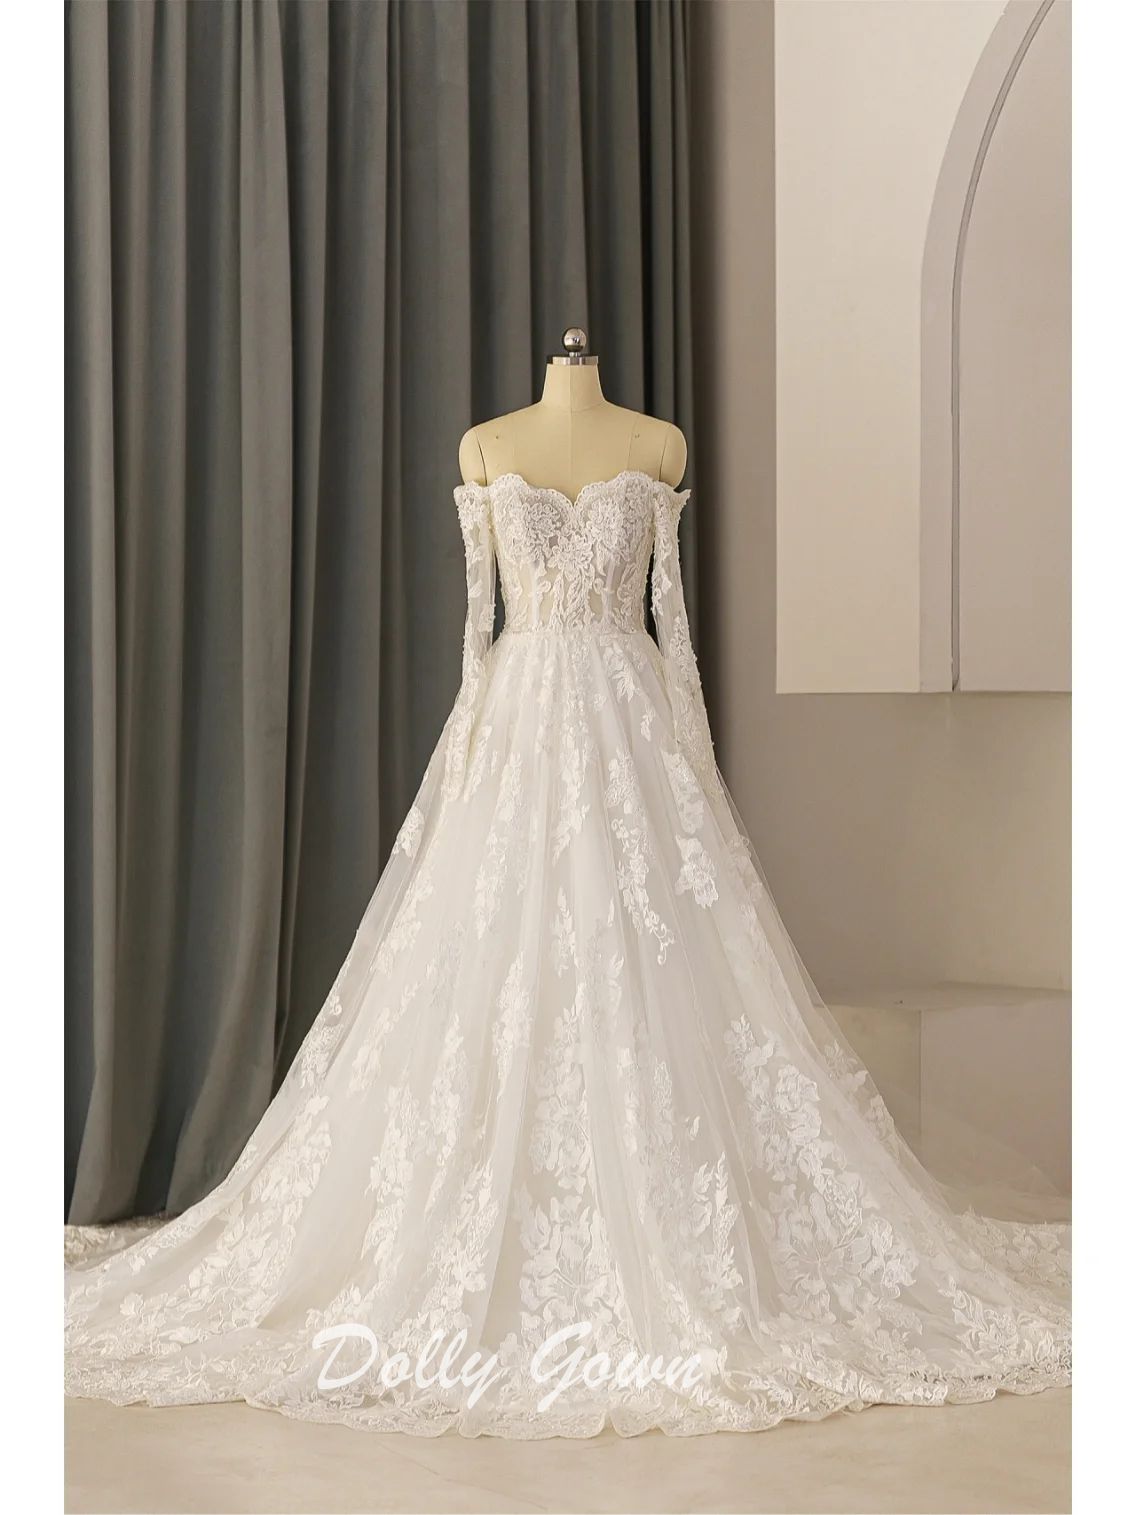 Off The Shoulder Lace A-line See Through Long Sleeve Wedding Dress - DollyGown